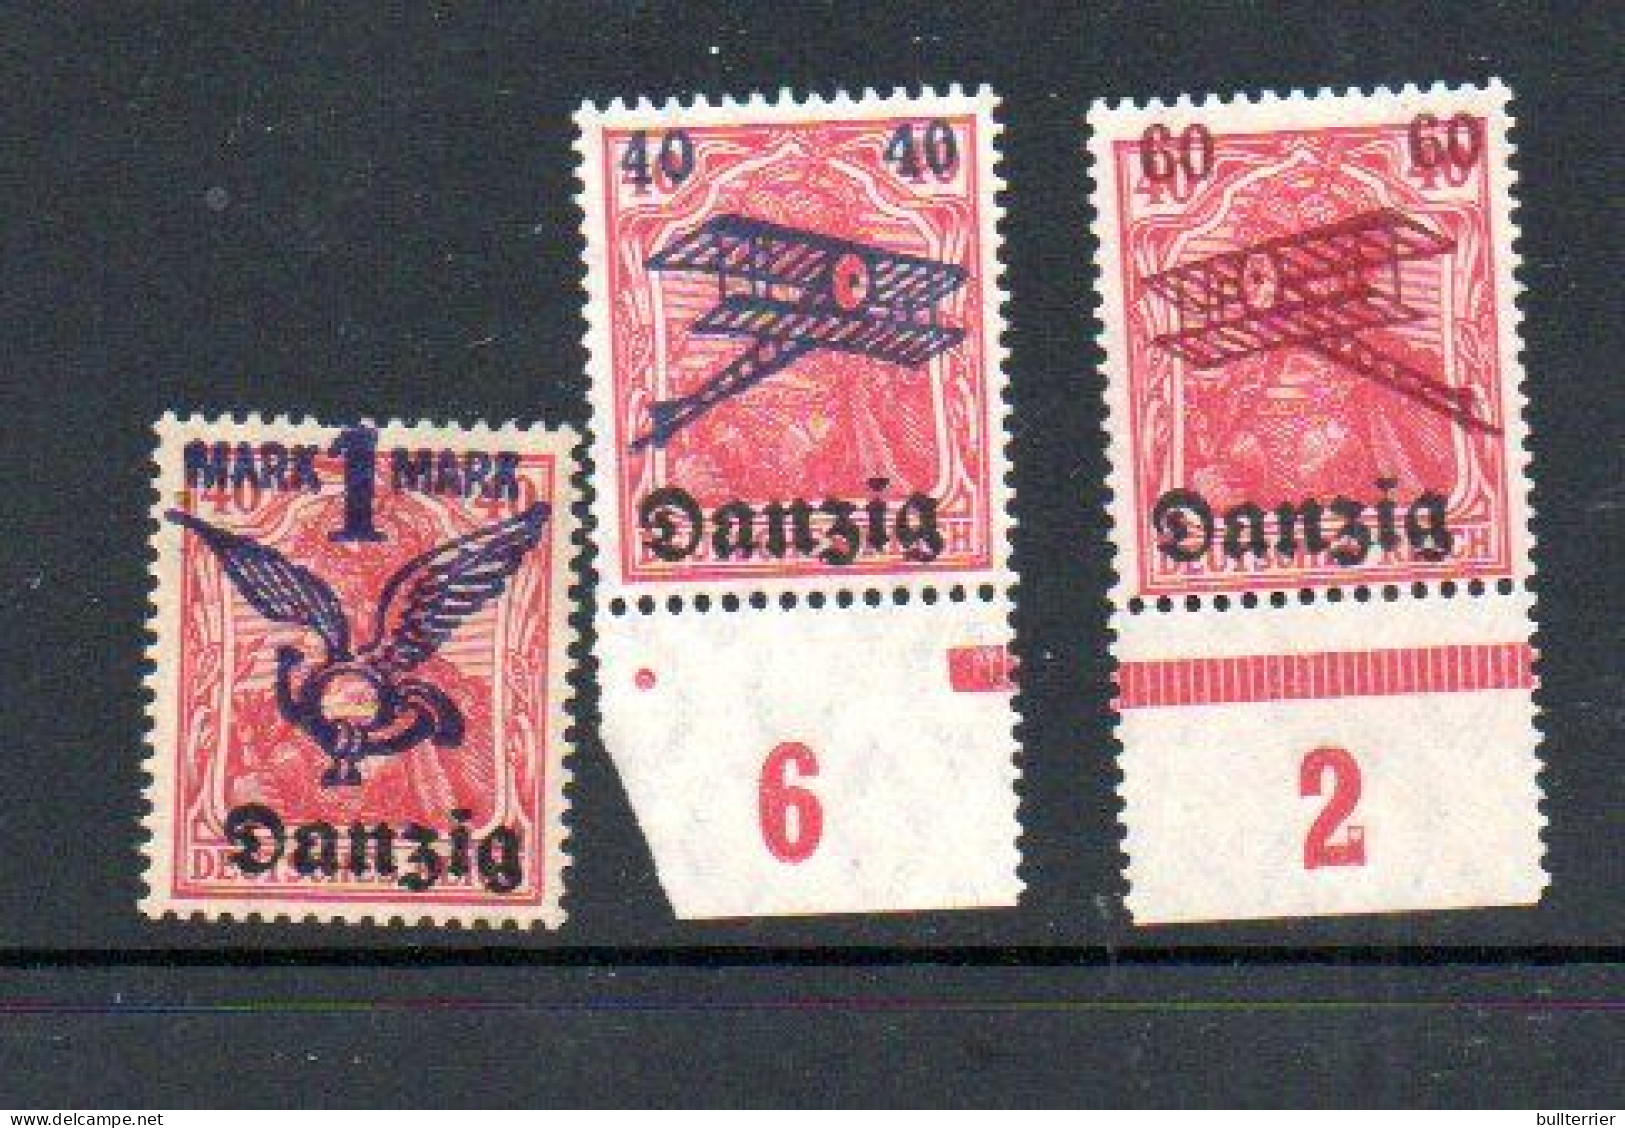 DANZIG - 1920 AIR SURCHARGES SET OF 3 MINT HINGED PREVIOUSLY - Sonstige - Europa